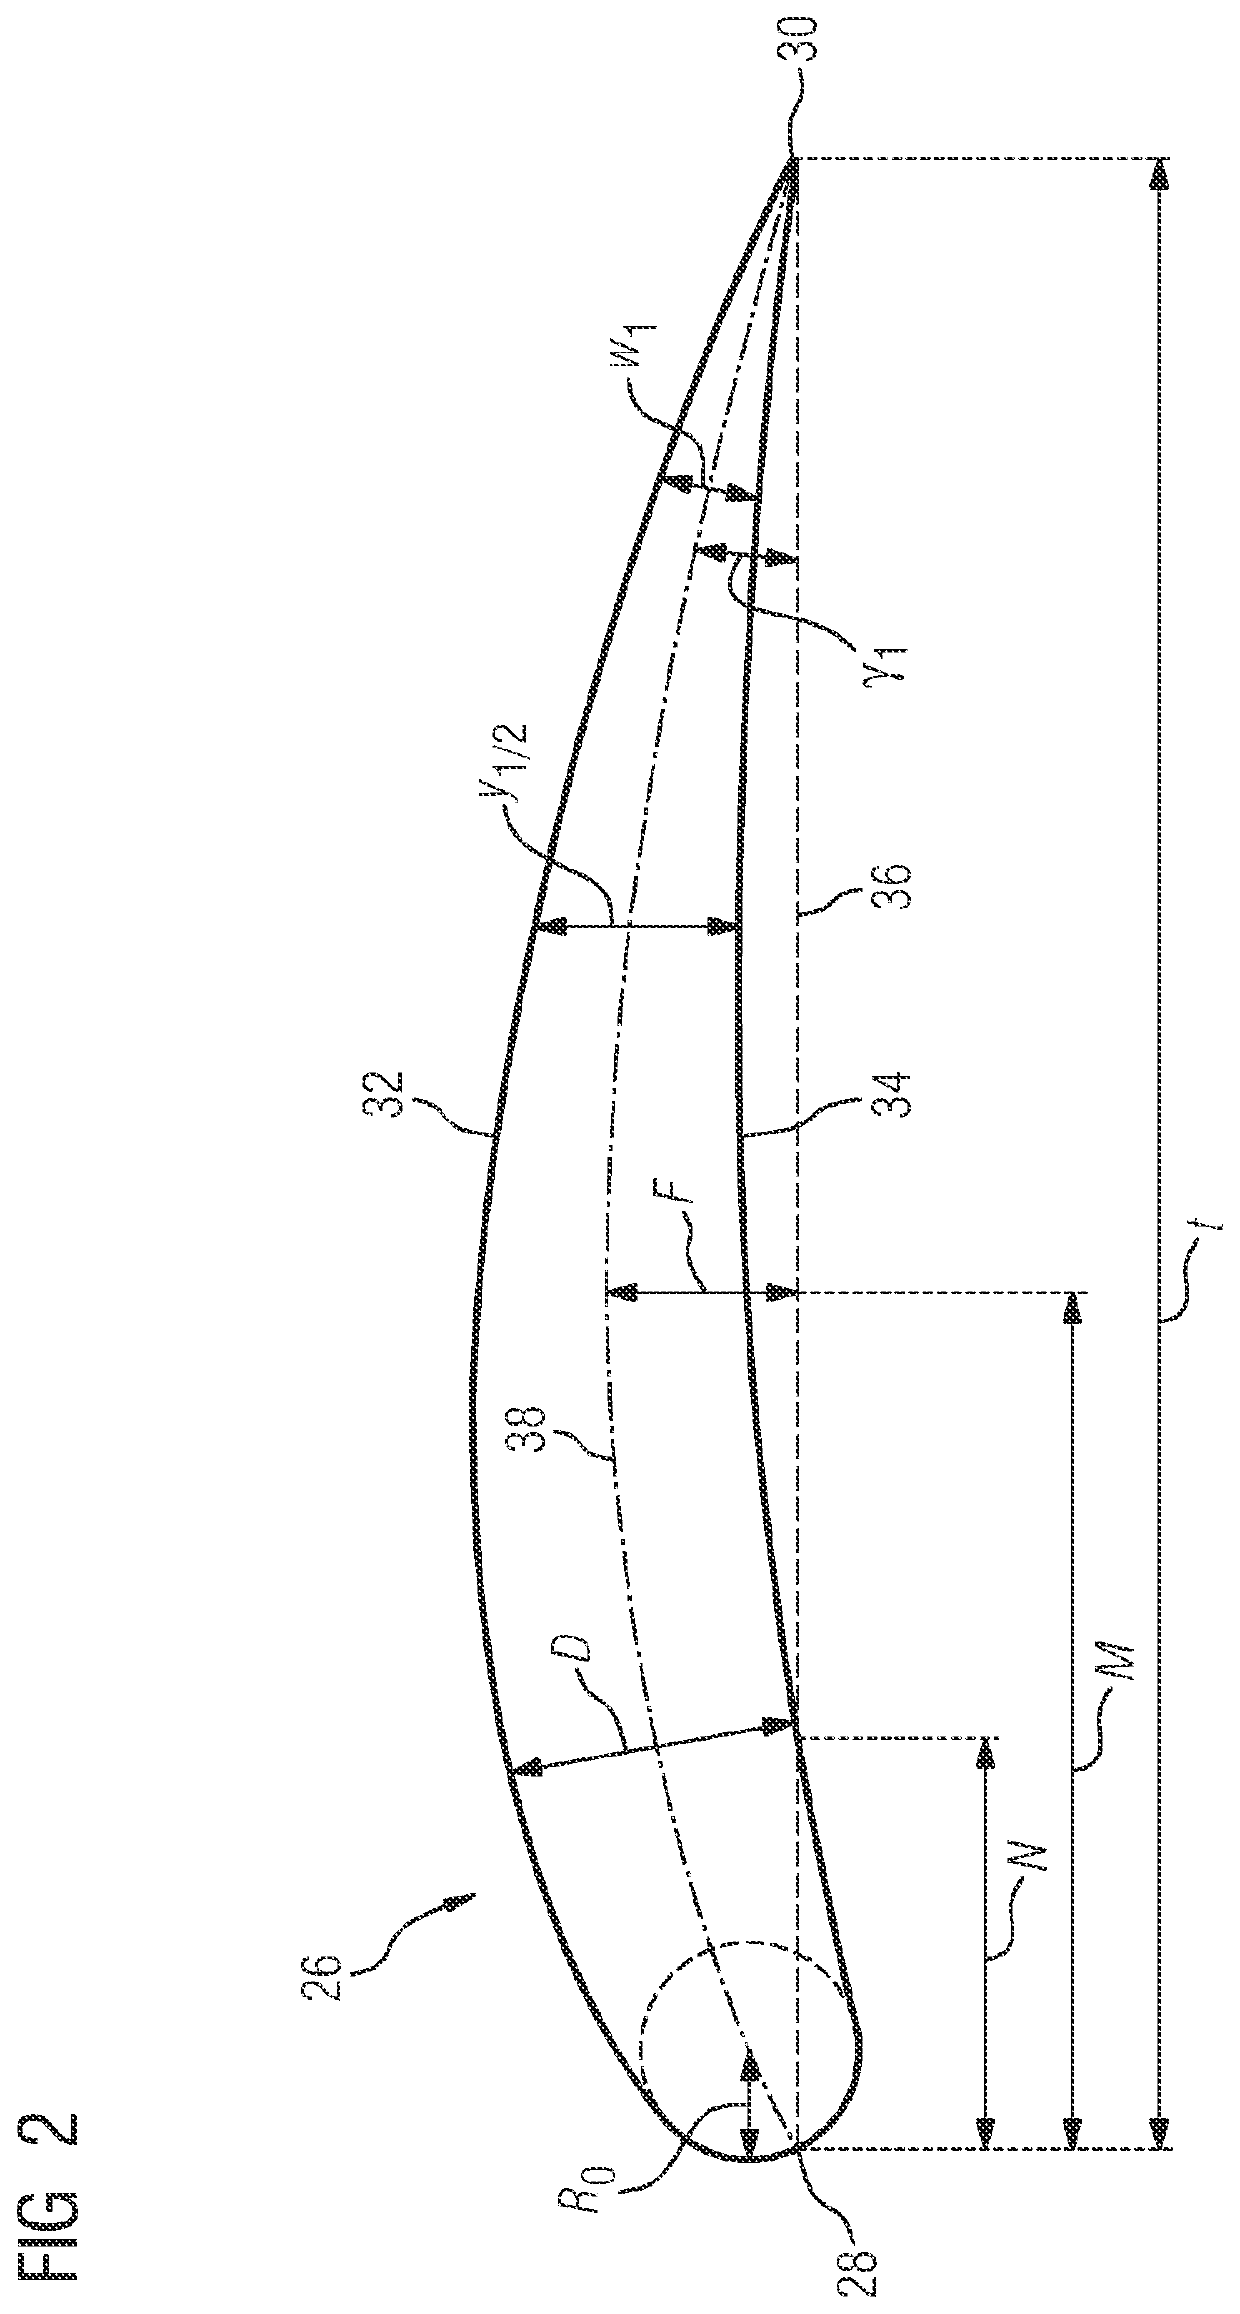 Design and production of a turbomachine vane